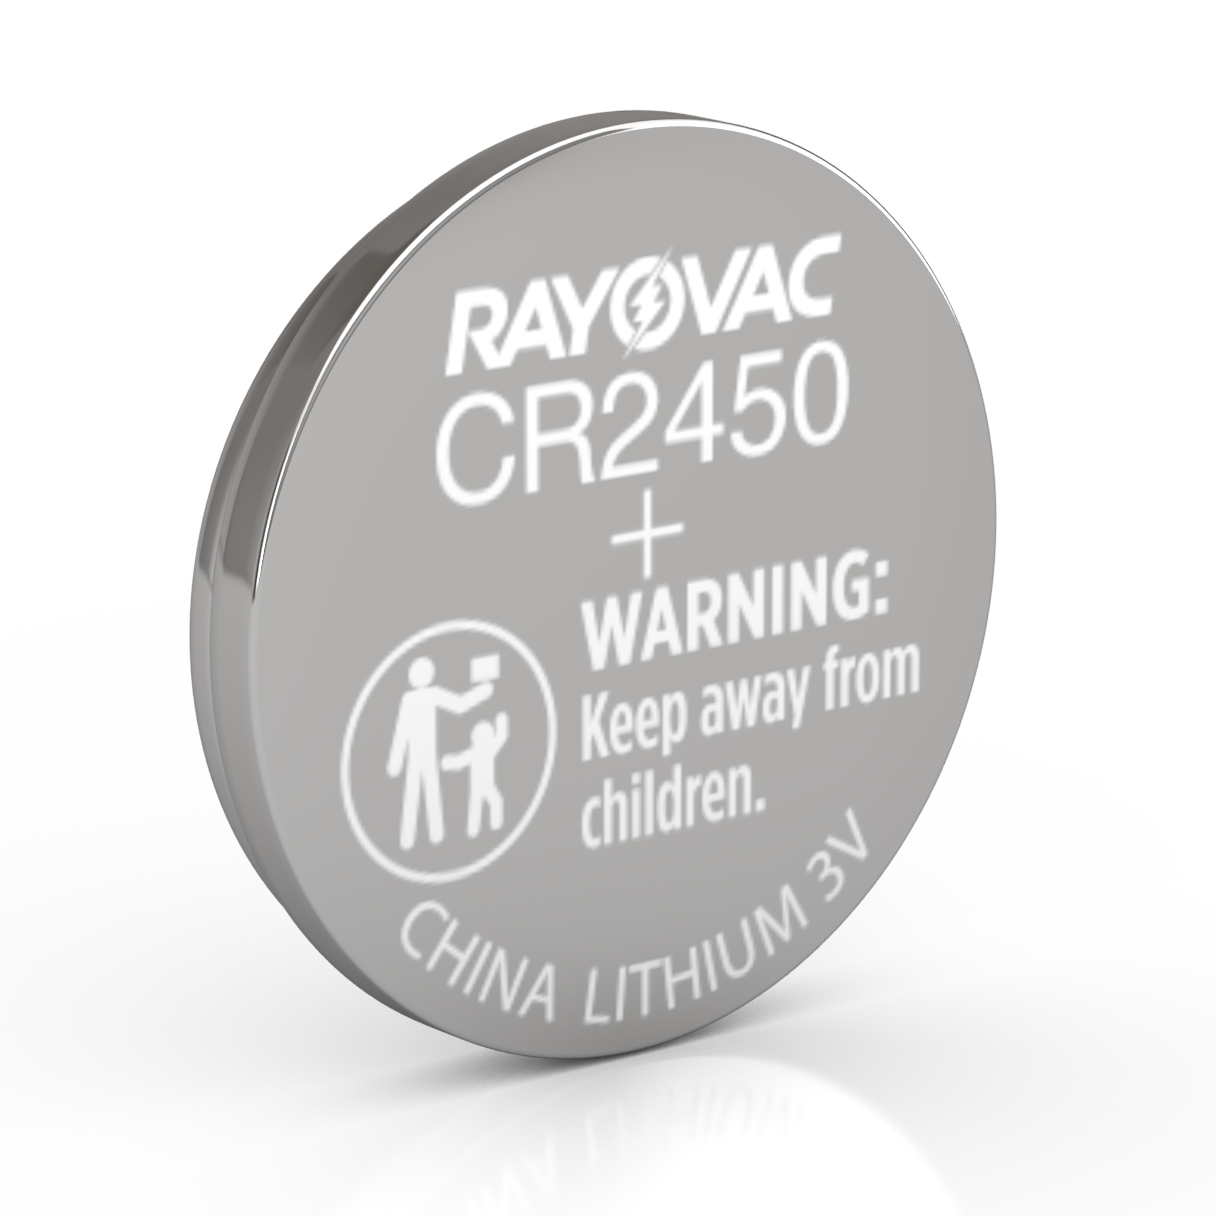 https://rayovac.com/wp-content/uploads/2021/08/v2ROV_CR2450_COIN_Product-Image.png